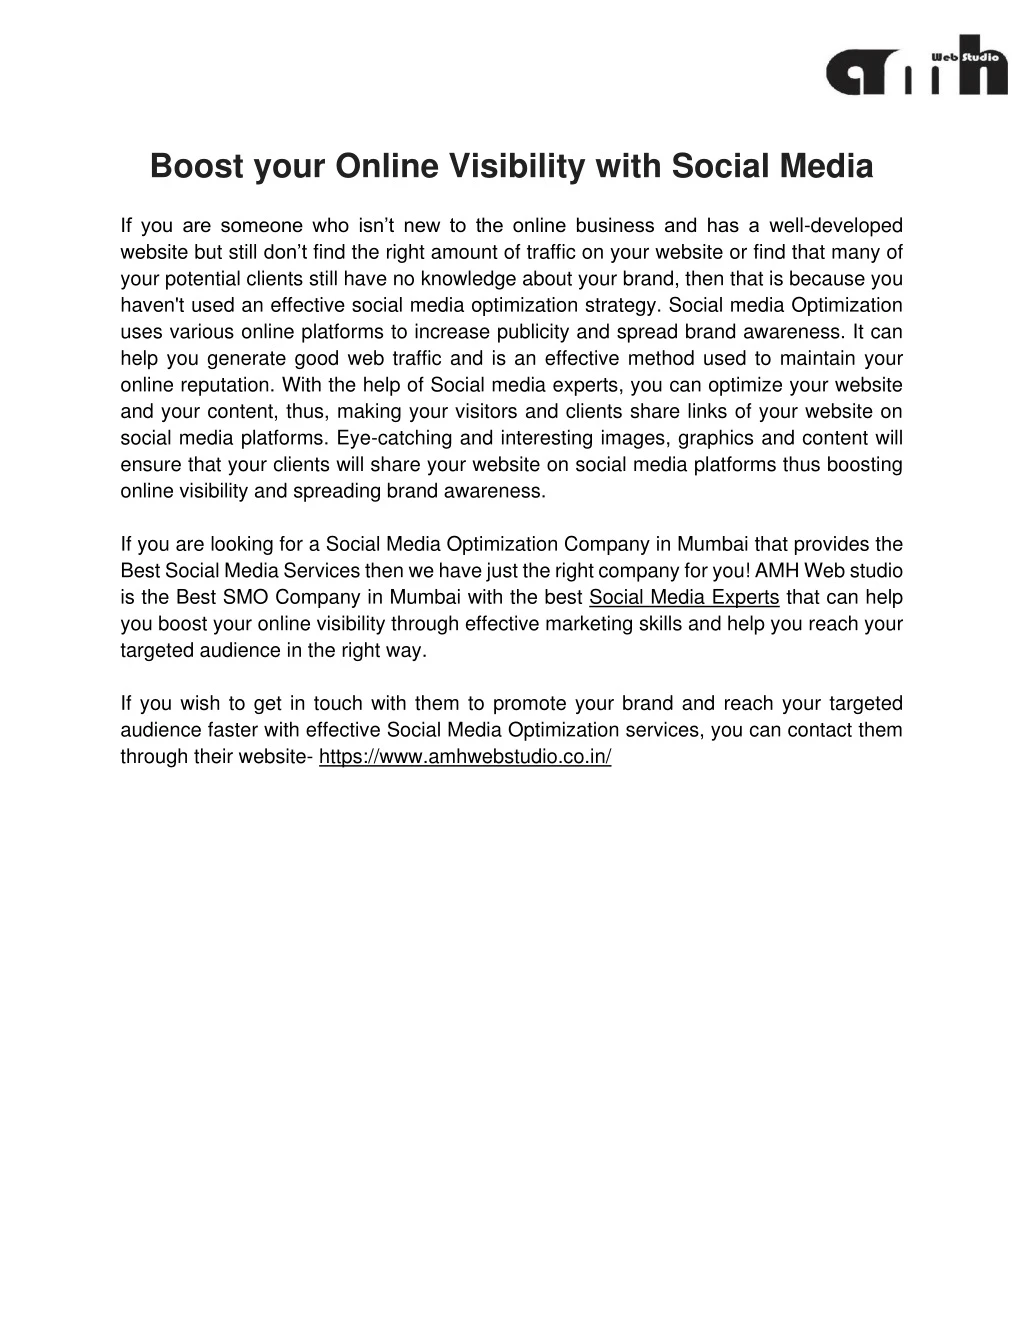 boost your online visibility with social media